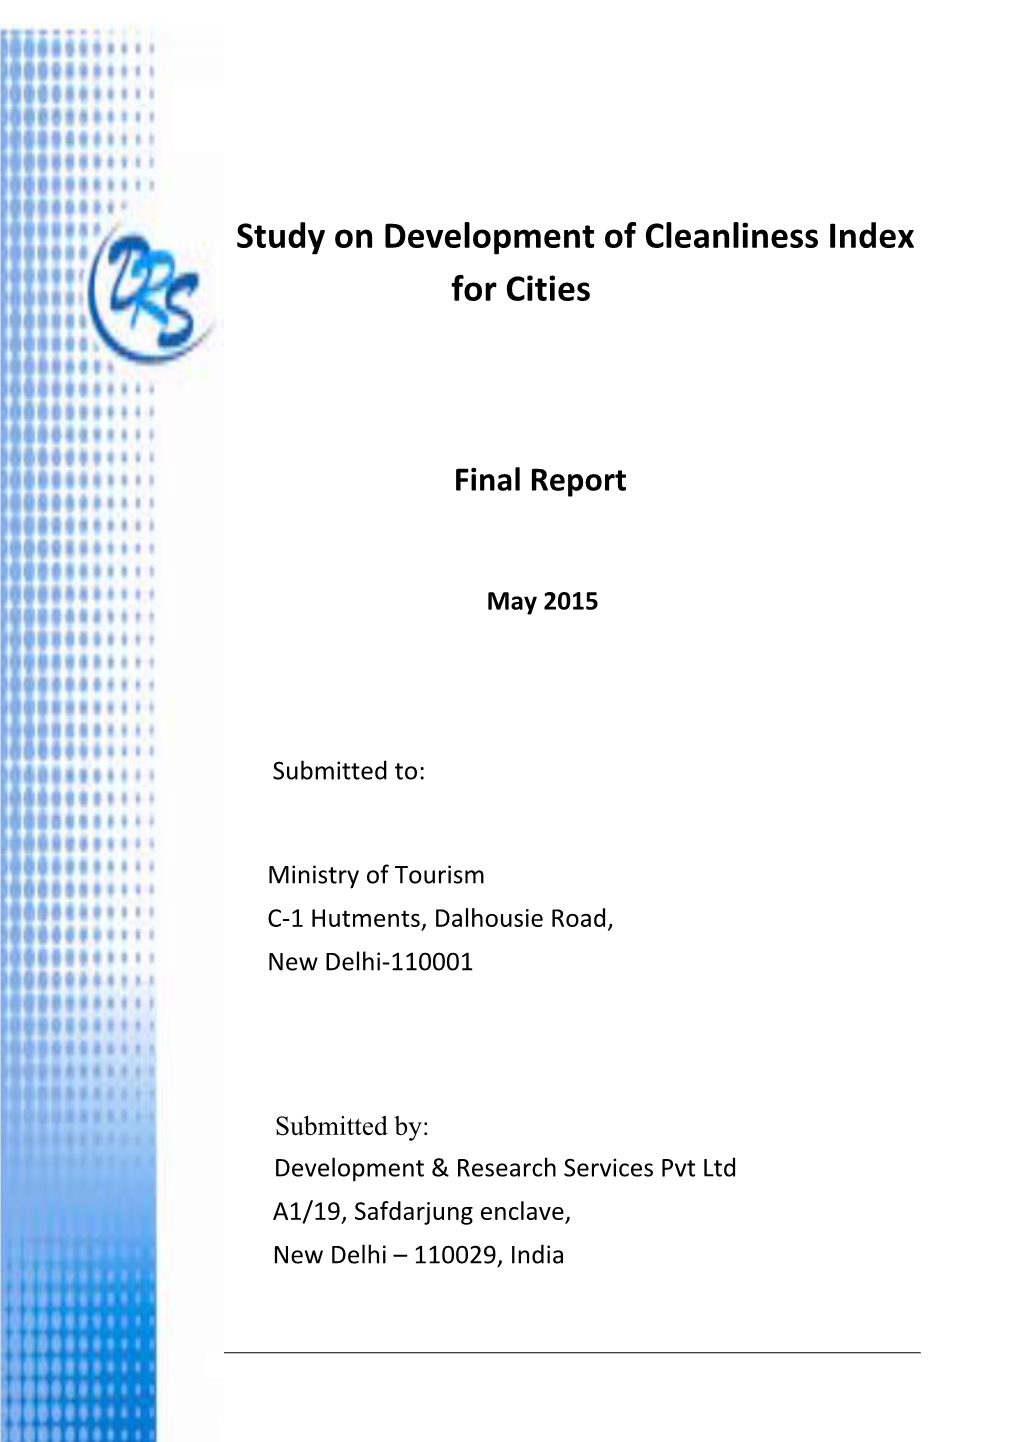 Study on Development of Cleanliness Index for Cities